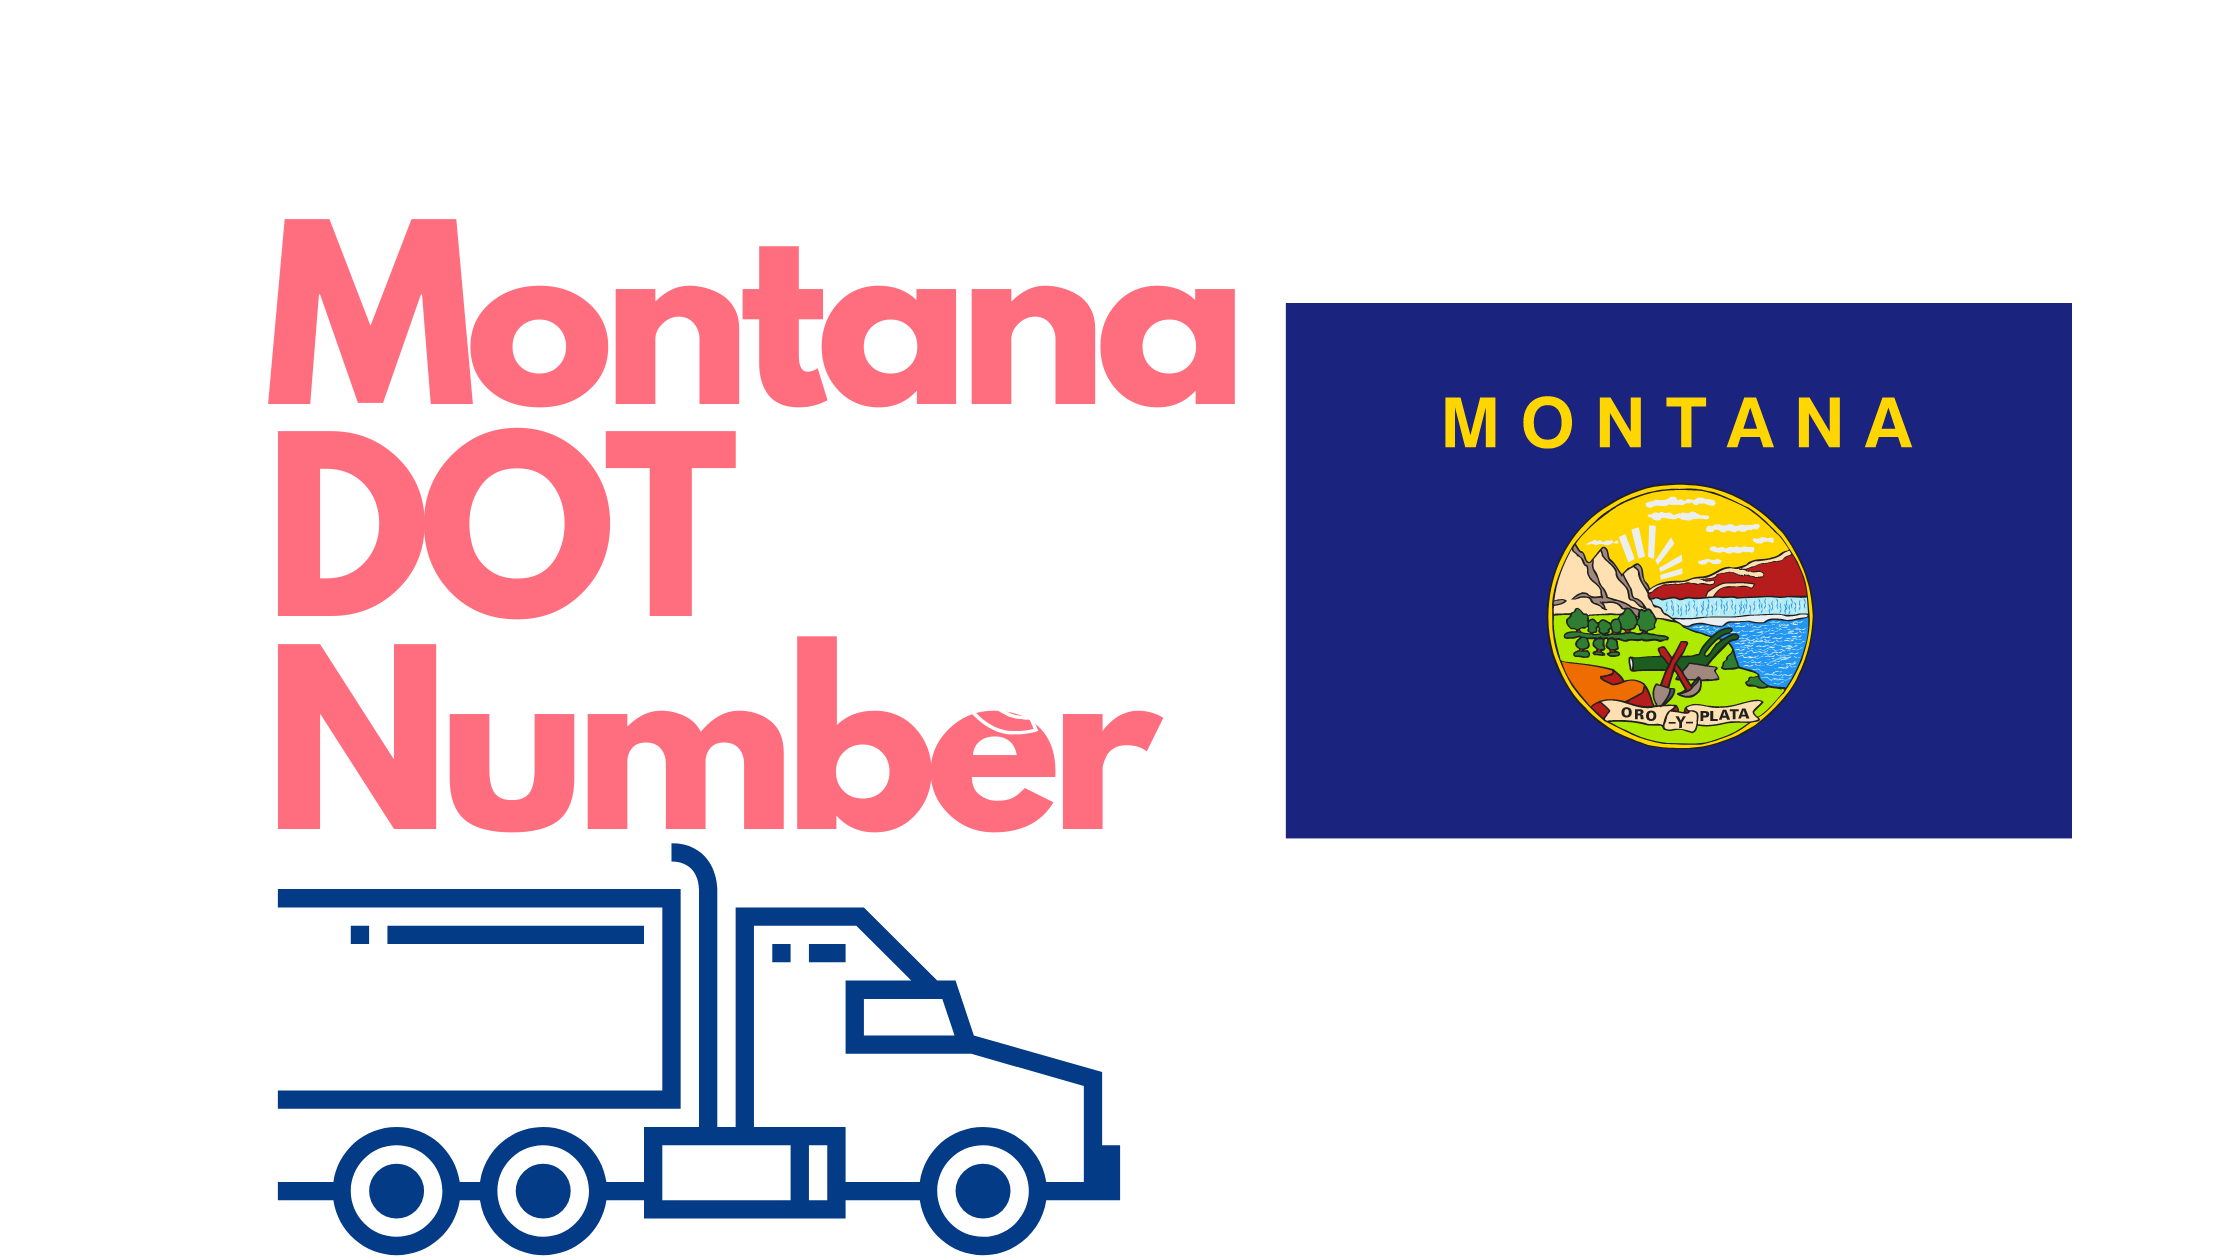 Montana DOT Number product image reference 1